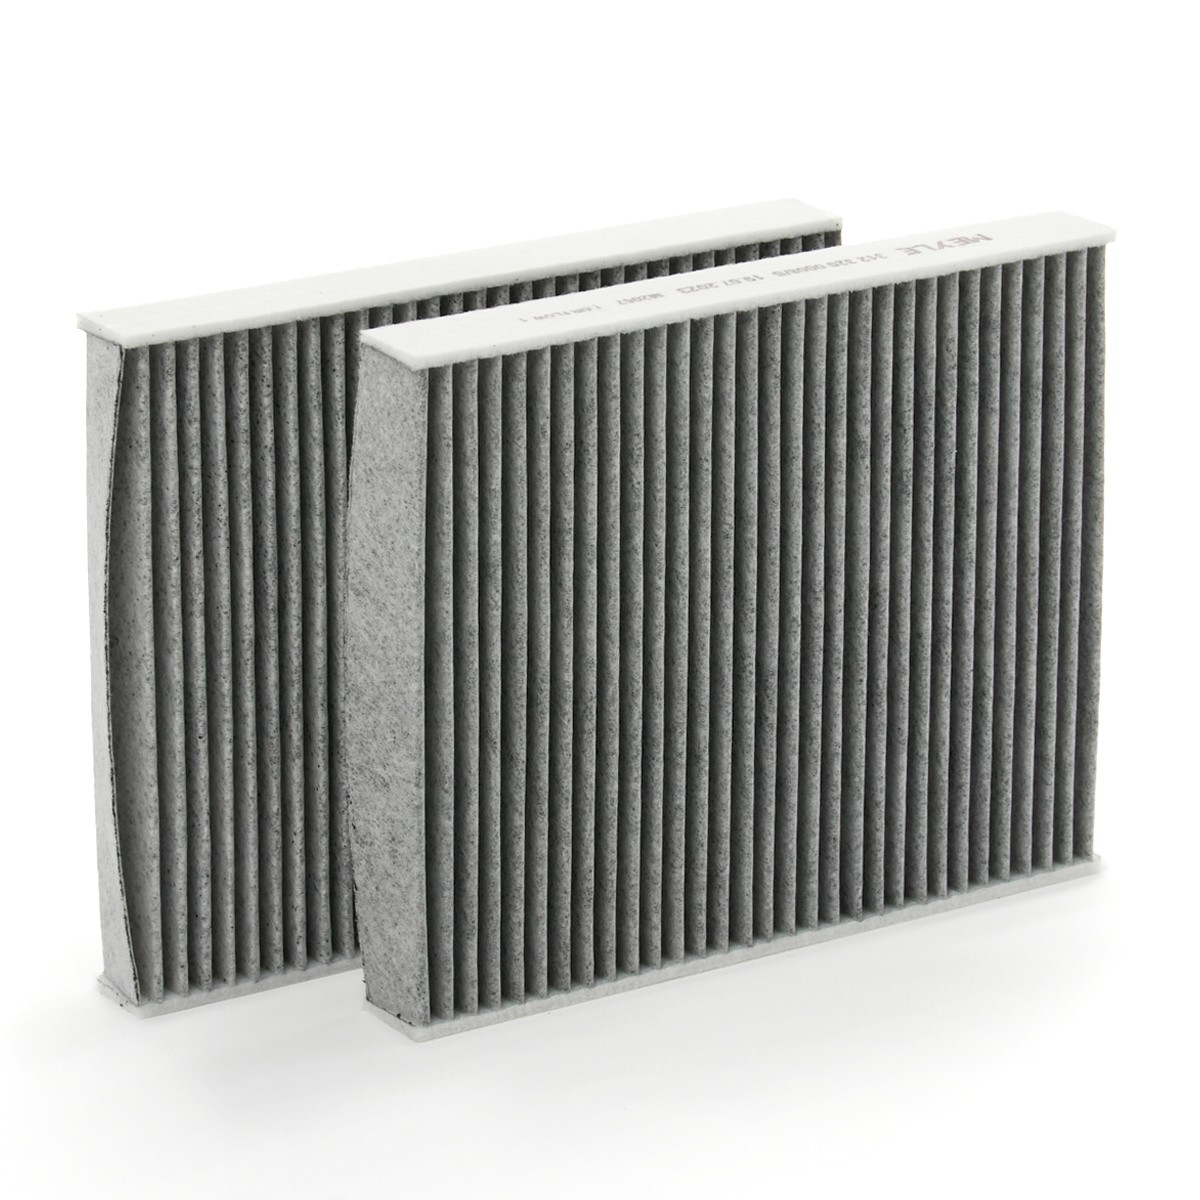 MCF0254 MEYLE Activated Carbon Filter, Filter Insert, with Odour Absorbent Effect, 247 mm x 207 mm x 27 mm, ORIGINAL Quality Width: 207mm, Height: 27mm, Length: 247mm Cabin filter 312 320 0008/S buy